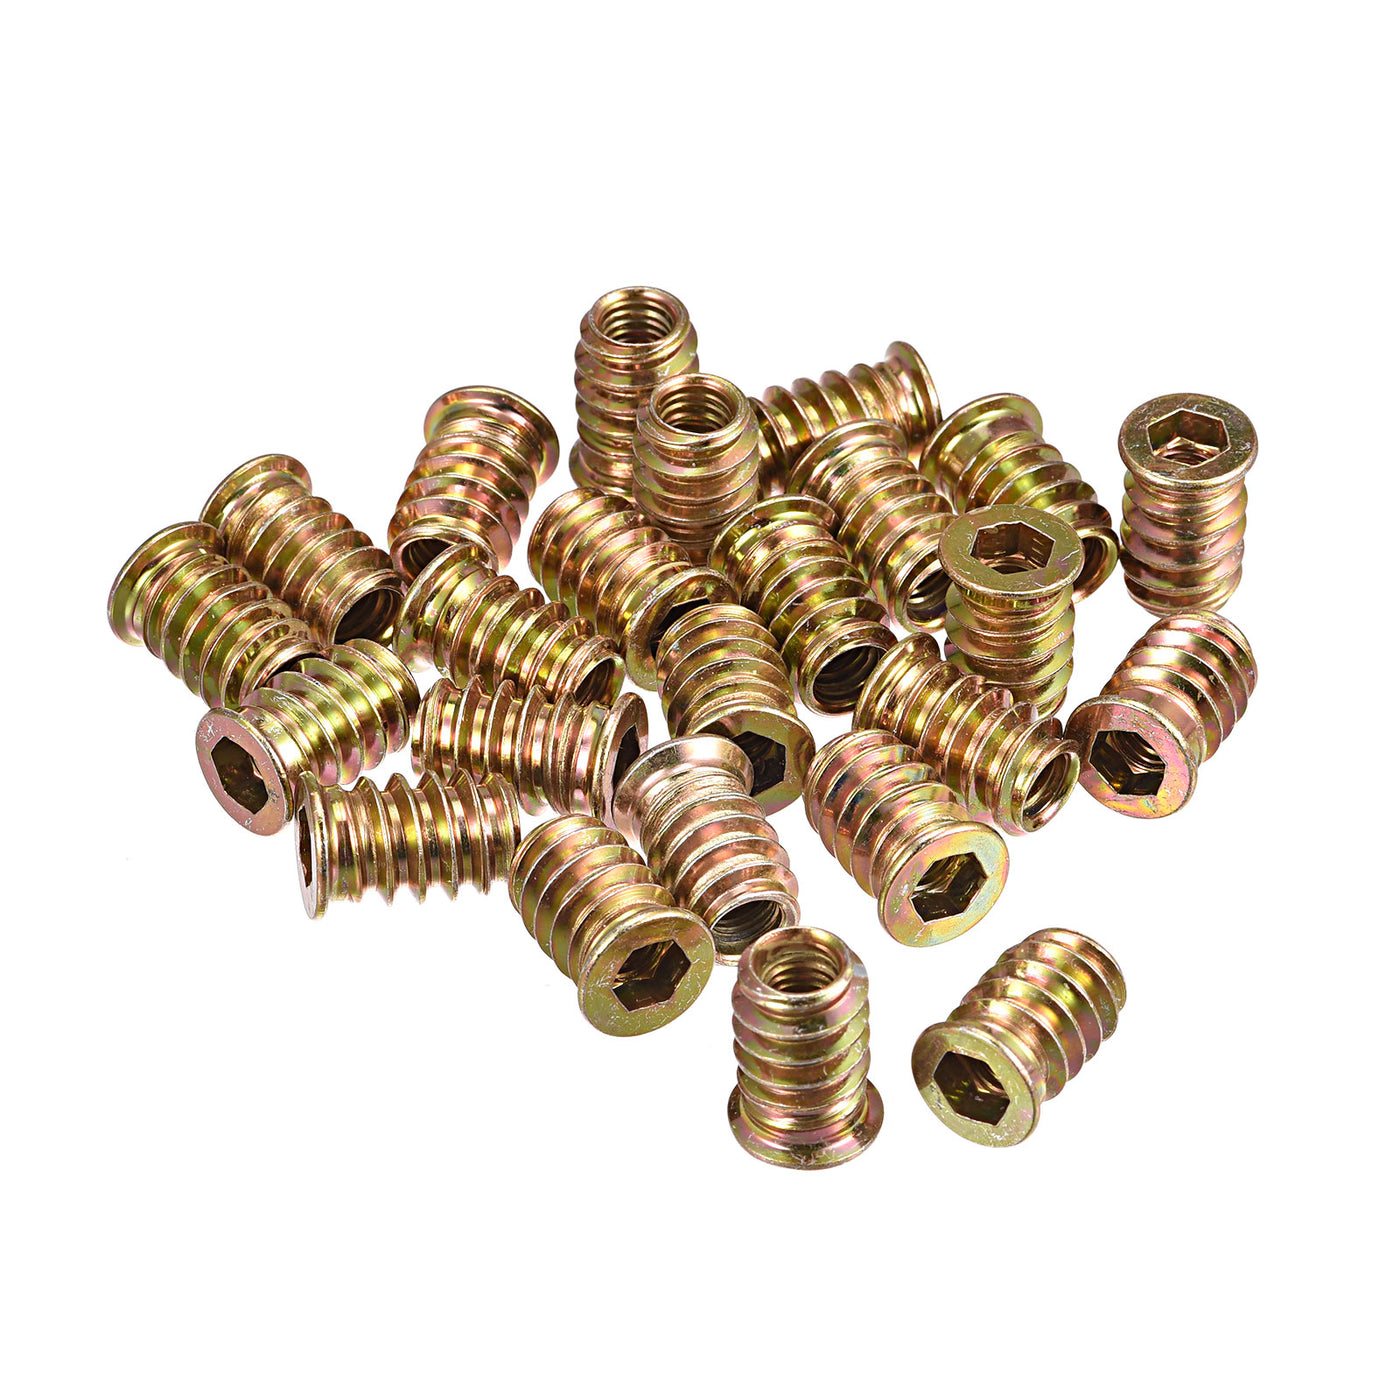 uxcell Uxcell M6x17mm Threaded Inserts for Wood Hex Socket Drive Furniture Screw-in Nut 64pcs